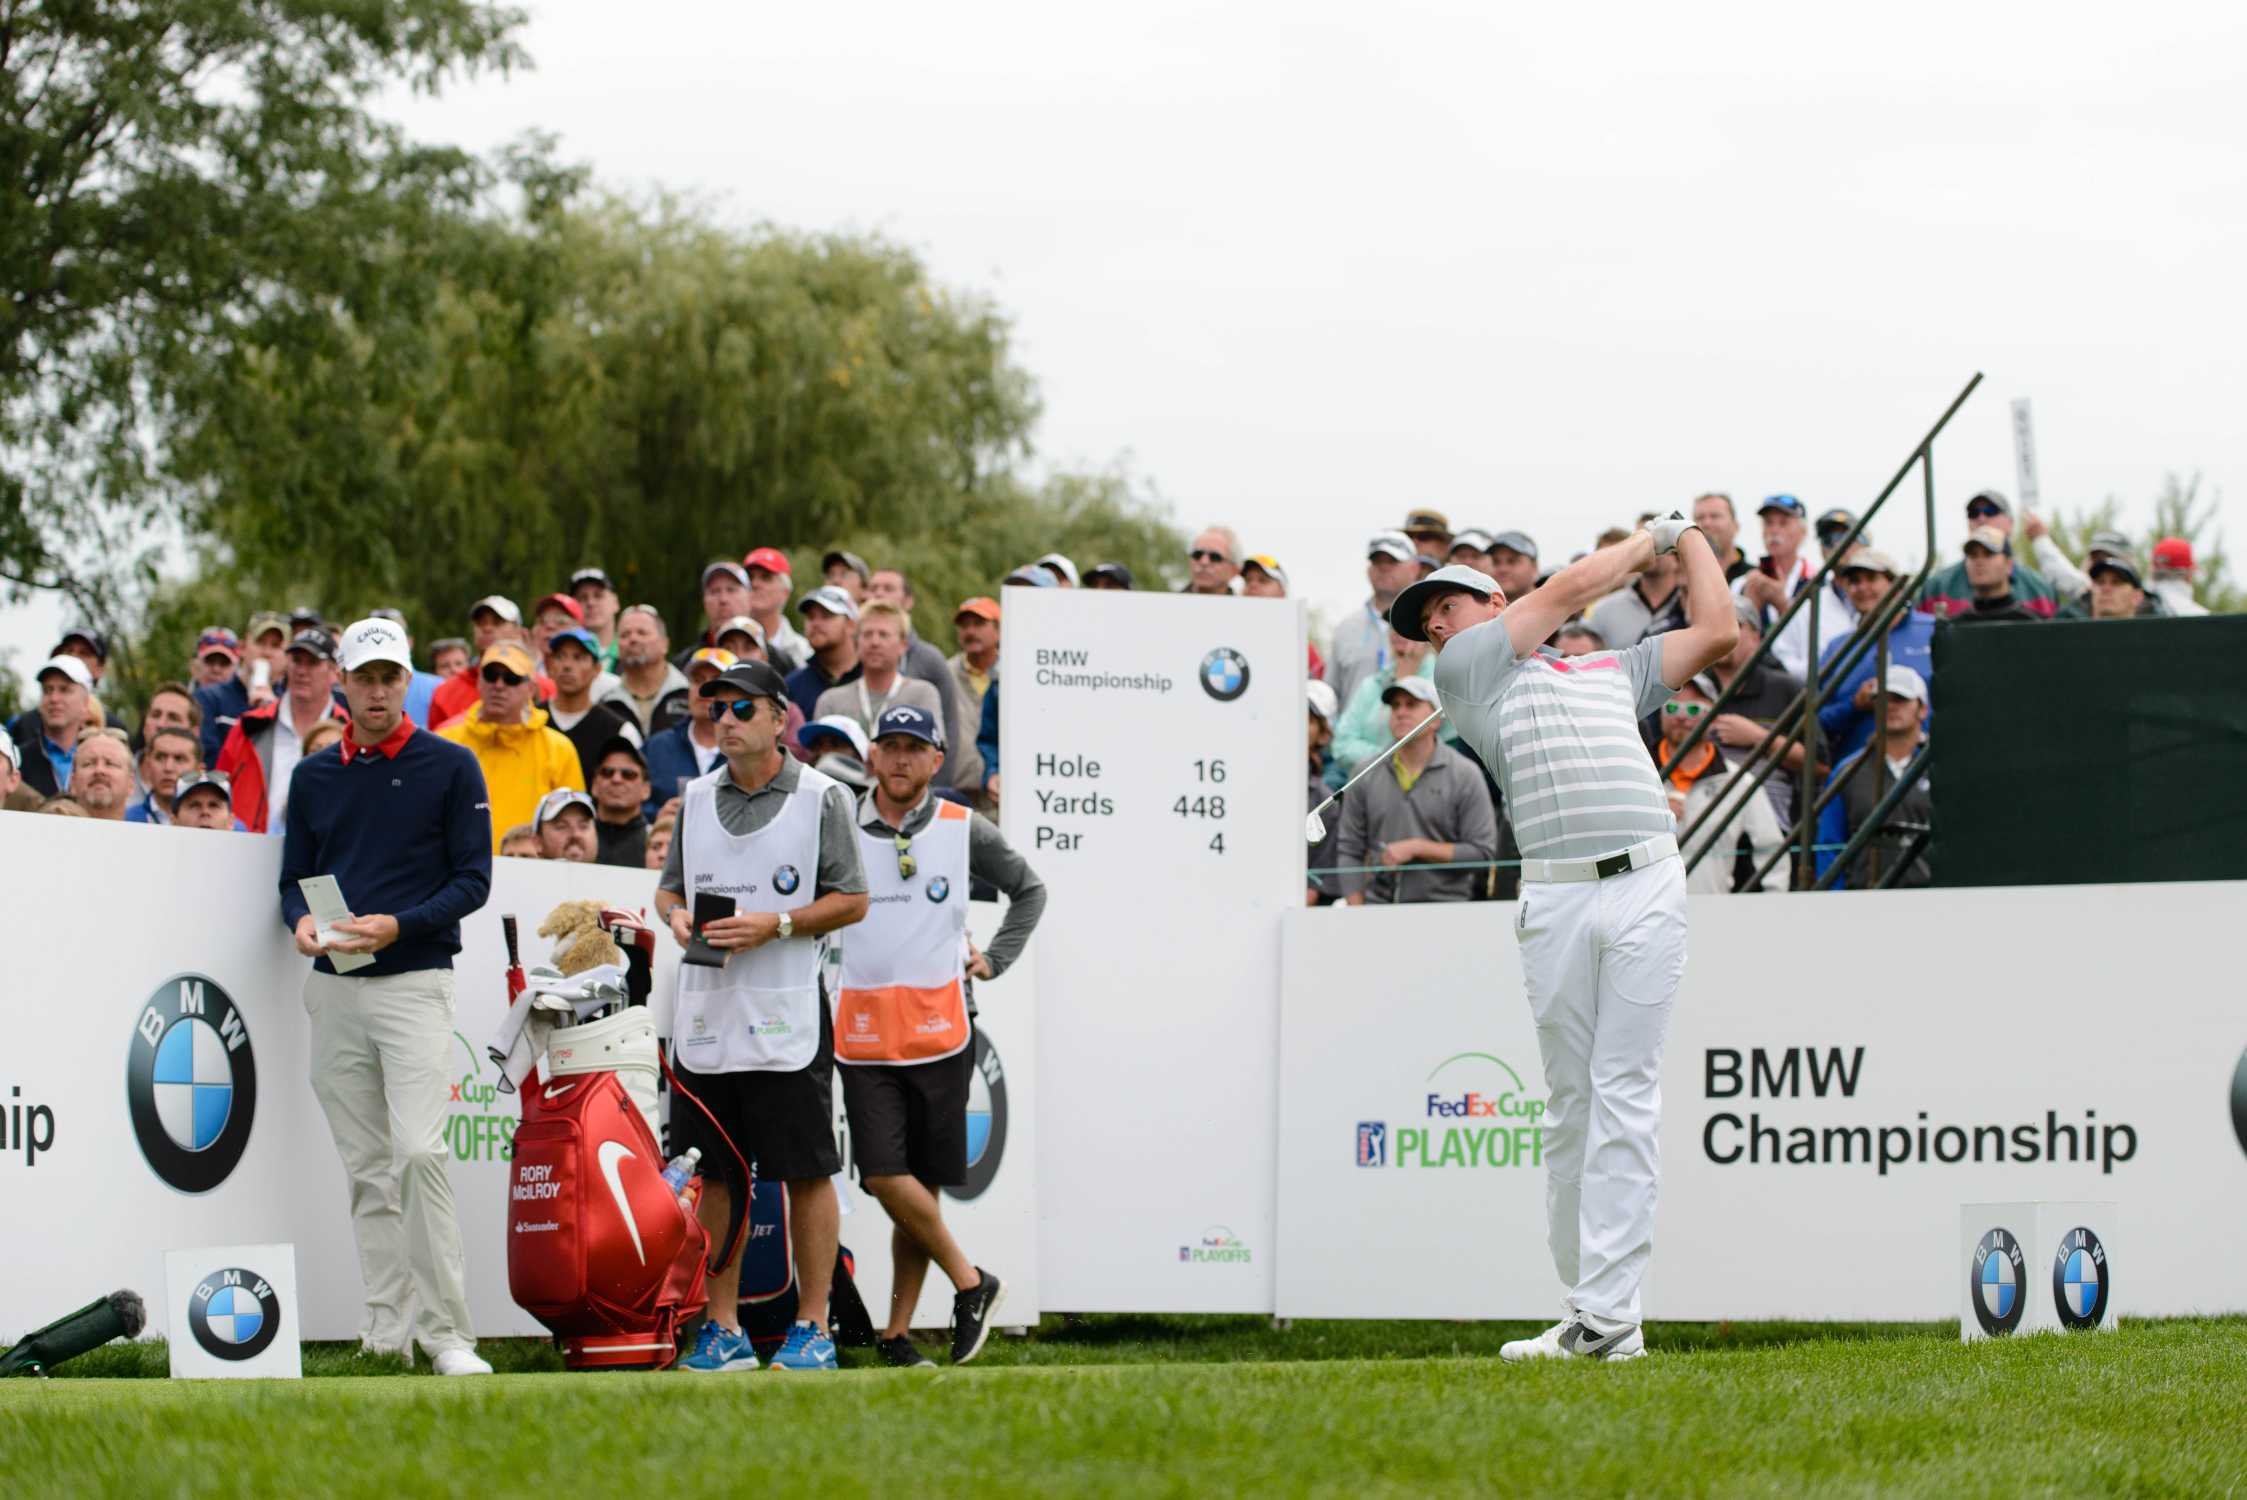 BMW Championship “Crunch Time” in Chicago.